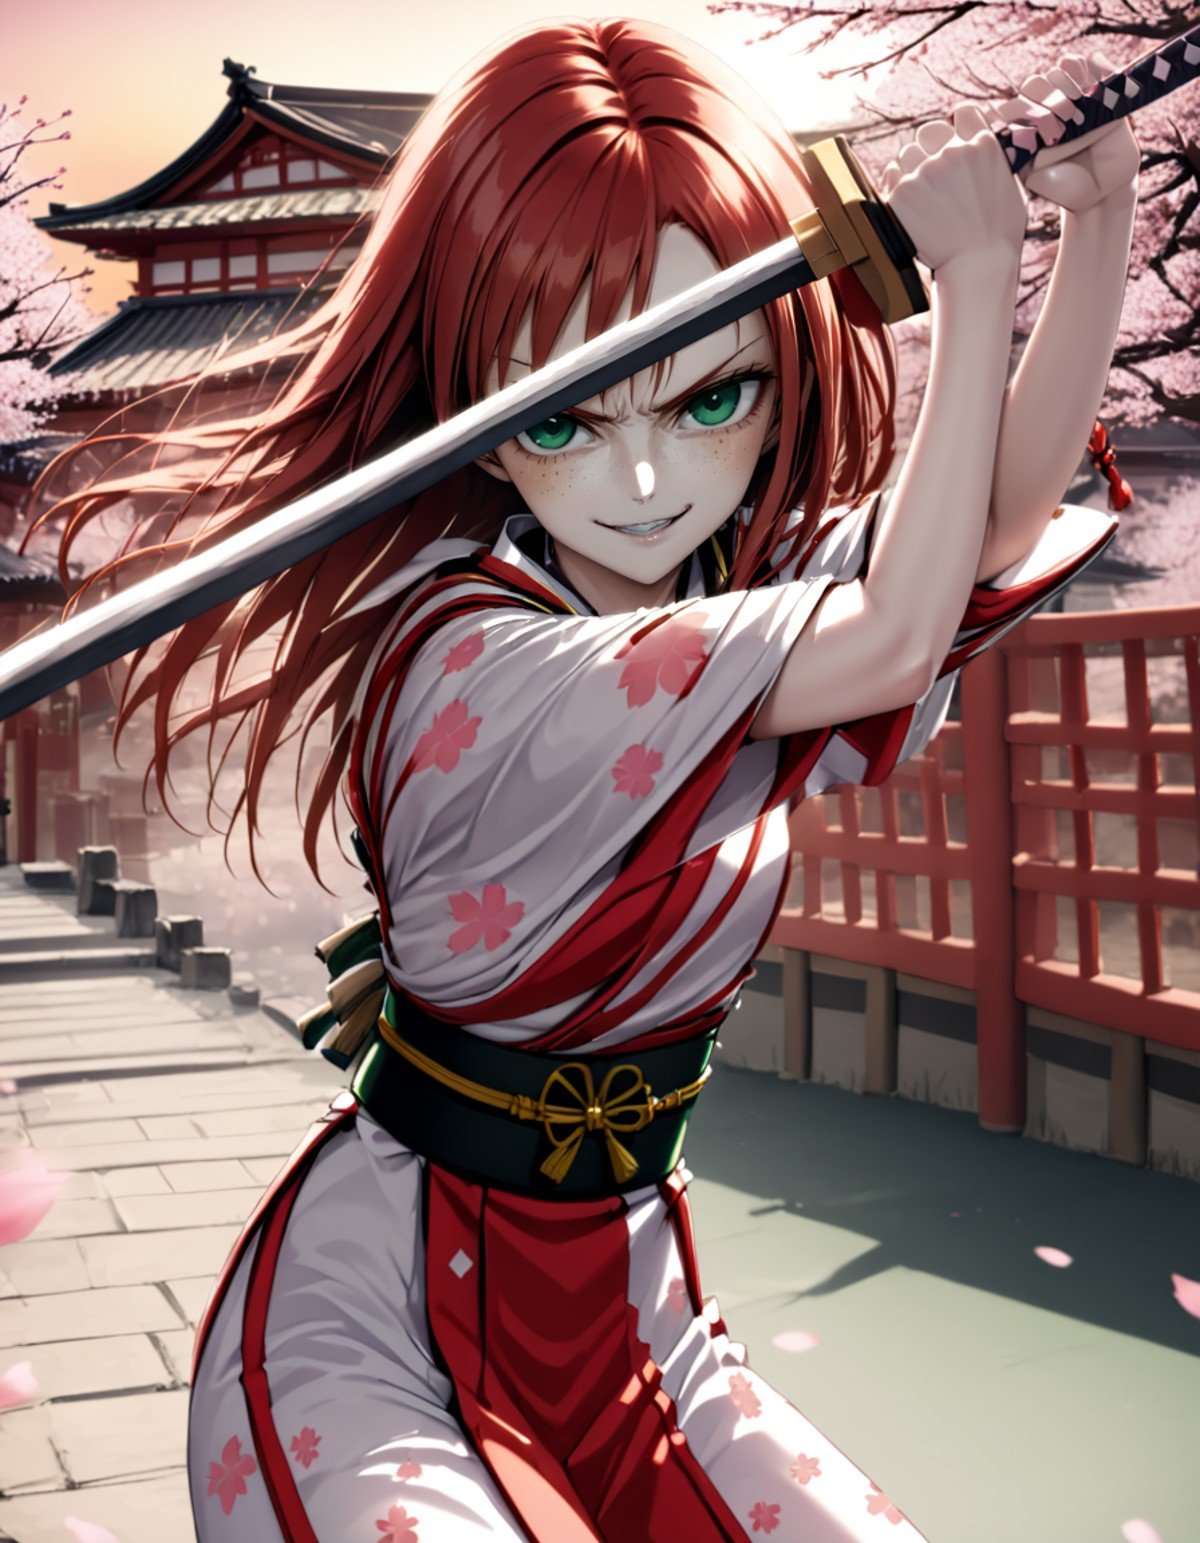 a realistic 20 year old anime kmw top model redhead woman, freckles,((high guard sword parry stance)),evil smile,traditional japanese white battle kimono, black belt,serious, focused,agressive,small breasts, flat chest,japanese architecture background, sakura blossoms, sakura trees,scenery,sunset,facing viewer,green eyes, <lora:kmw_v53:1> <lora:high-guard-sword-parry-stance:1>